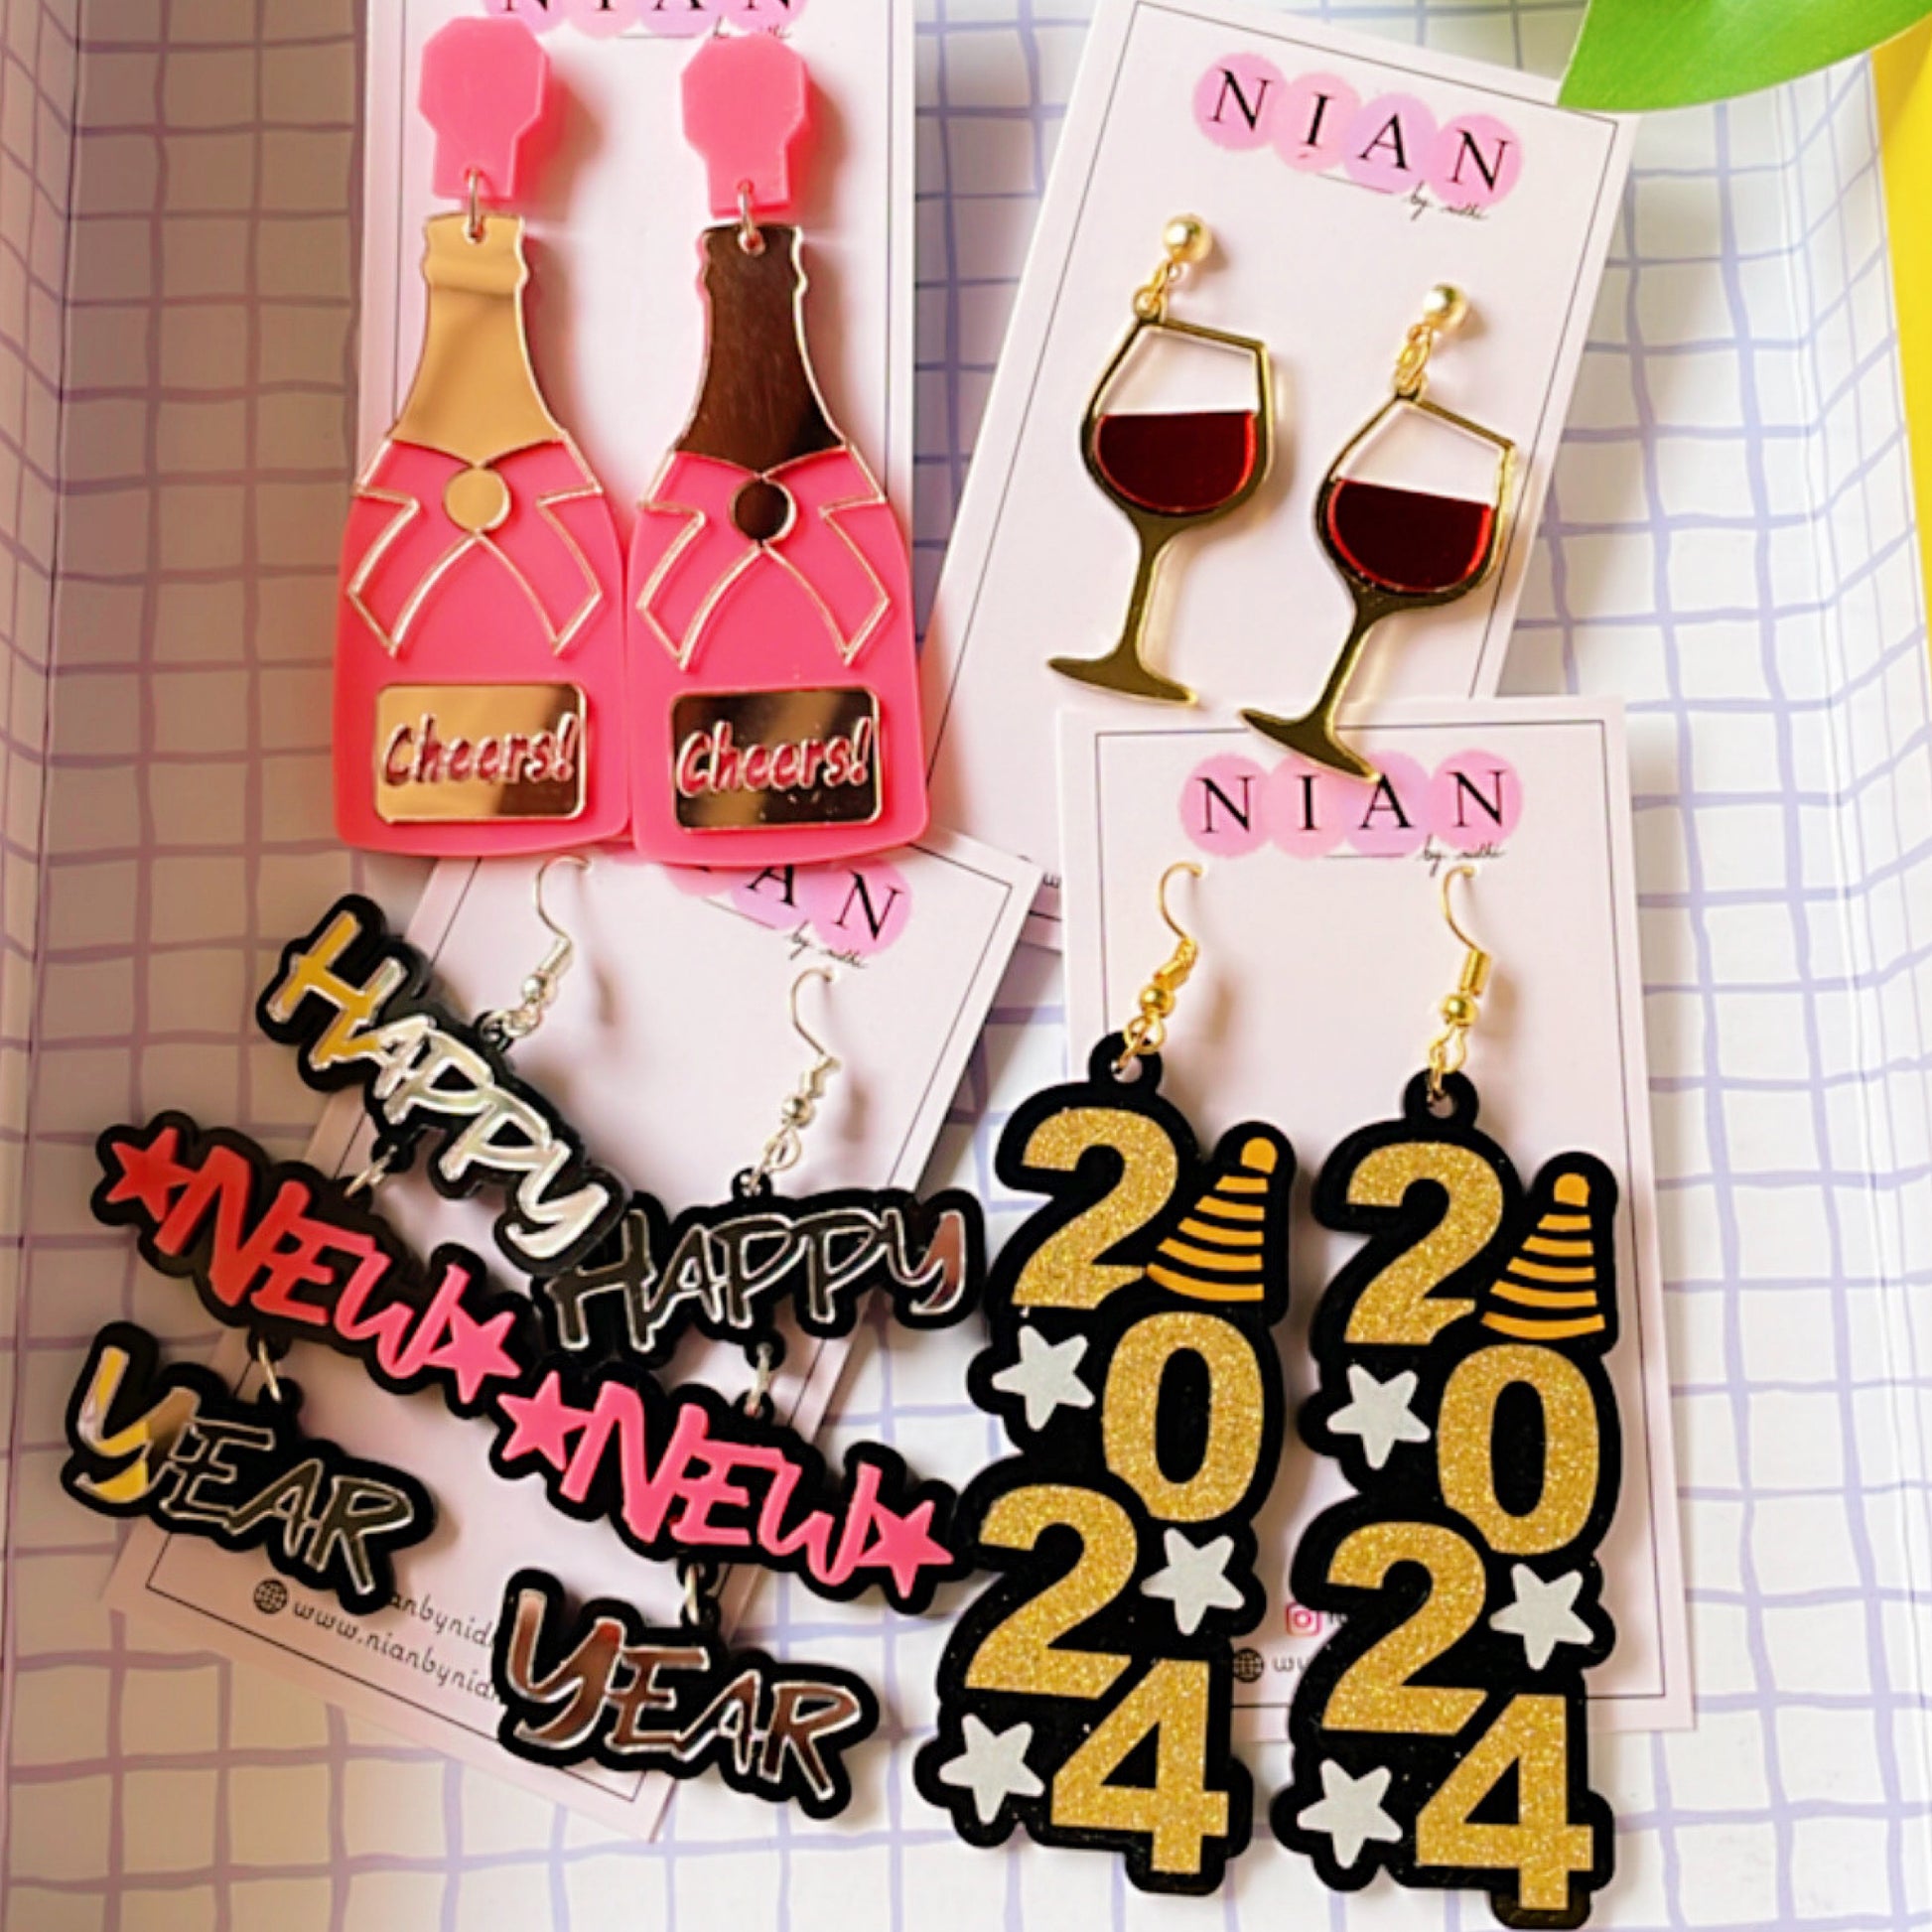 The New Year's Sparkle Set (Set of 4) - consisting of 4 earrings - Nian by Nidhi - placed in a squared-check background